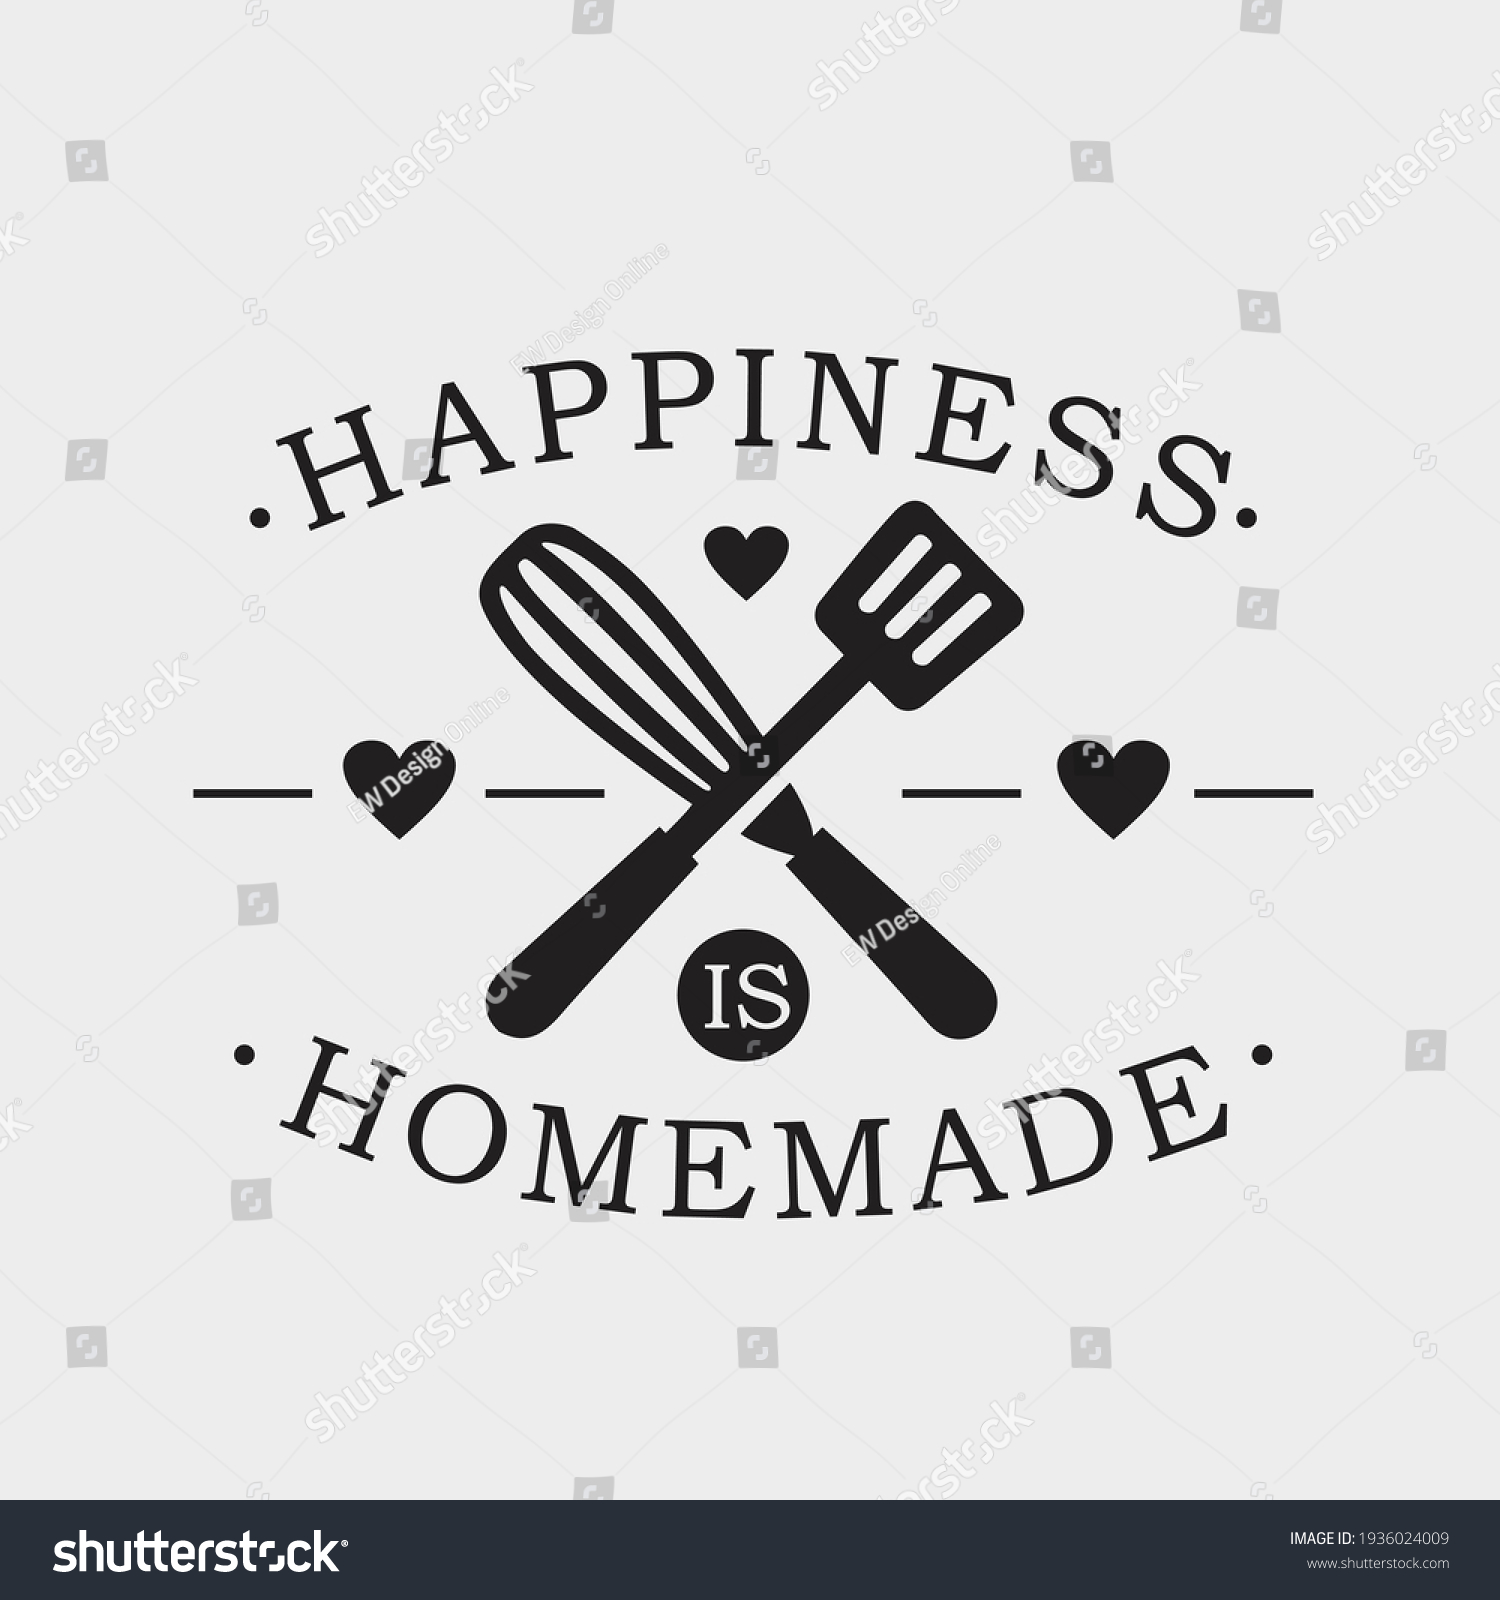 Happiness Is Homemade phrase  calligraphic sign with kitchen utensils. Elegant lettering and tool for food preparation, cooking. Typography vector illustration. #1936024009